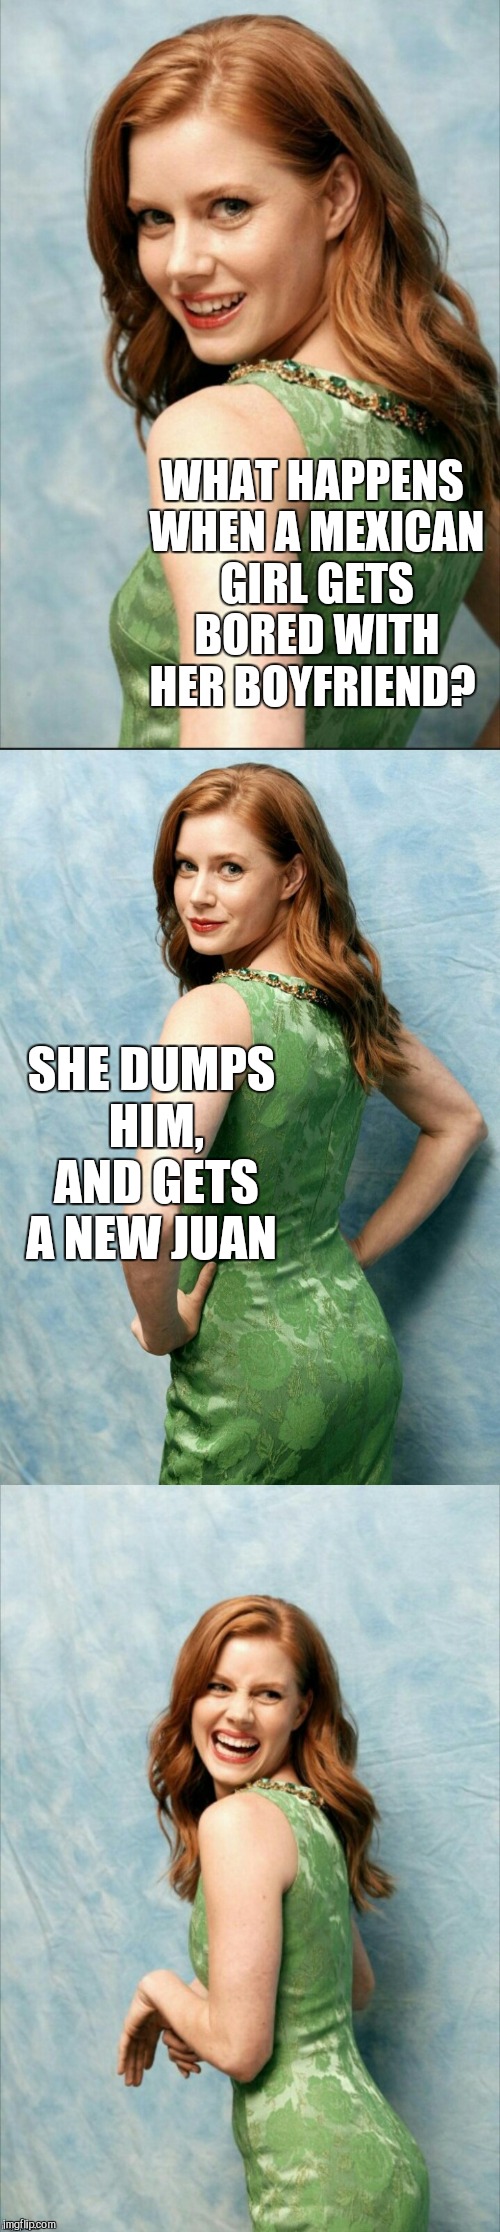 Amy Adams joke template | WHAT HAPPENS WHEN A MEXICAN GIRL GETS BORED WITH HER BOYFRIEND? SHE DUMPS HIM, AND GETS A NEW JUAN | image tagged in amy adams joke template,jbmemegeek,amy adams,bad puns,mexican,mexicans | made w/ Imgflip meme maker